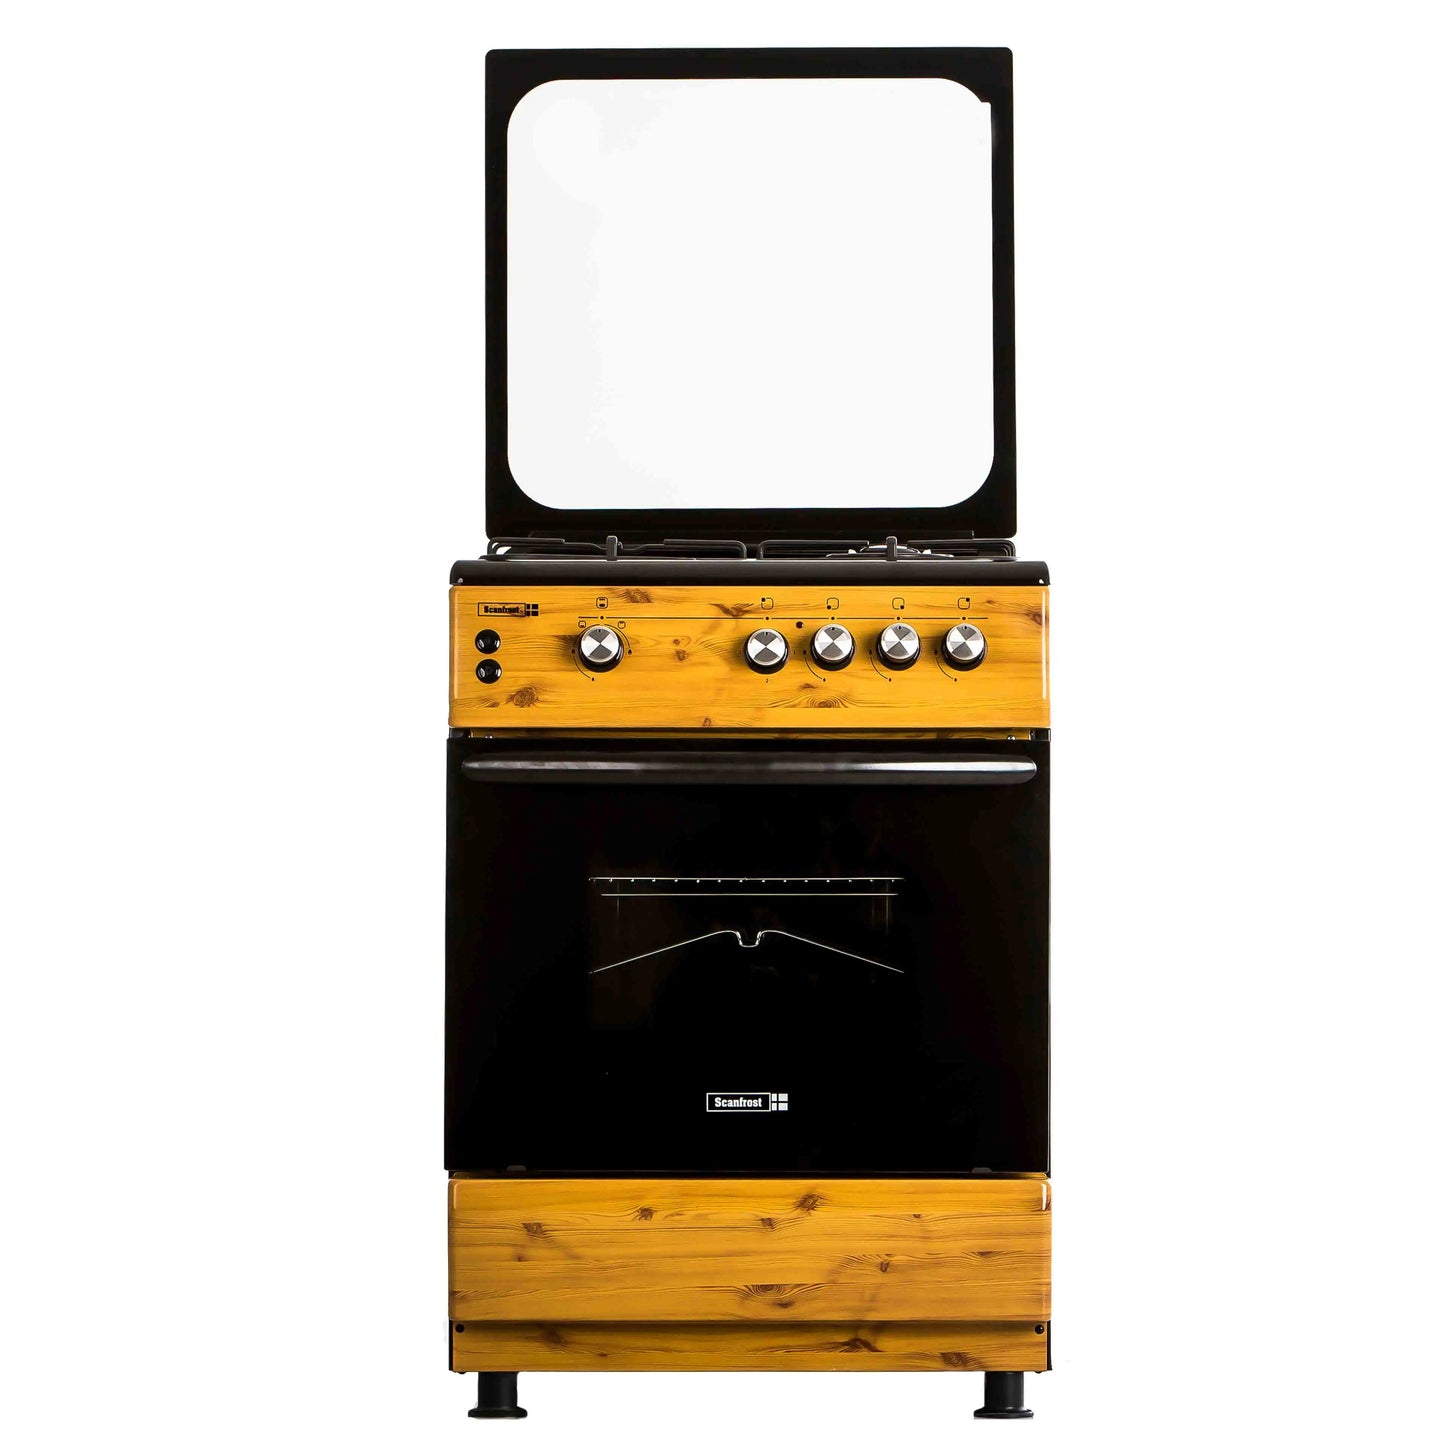 Scanfrost 60x60 3 Gas Burner + 1 Electric Hotplate Standing Cooker (wood finish)  CK6312NG